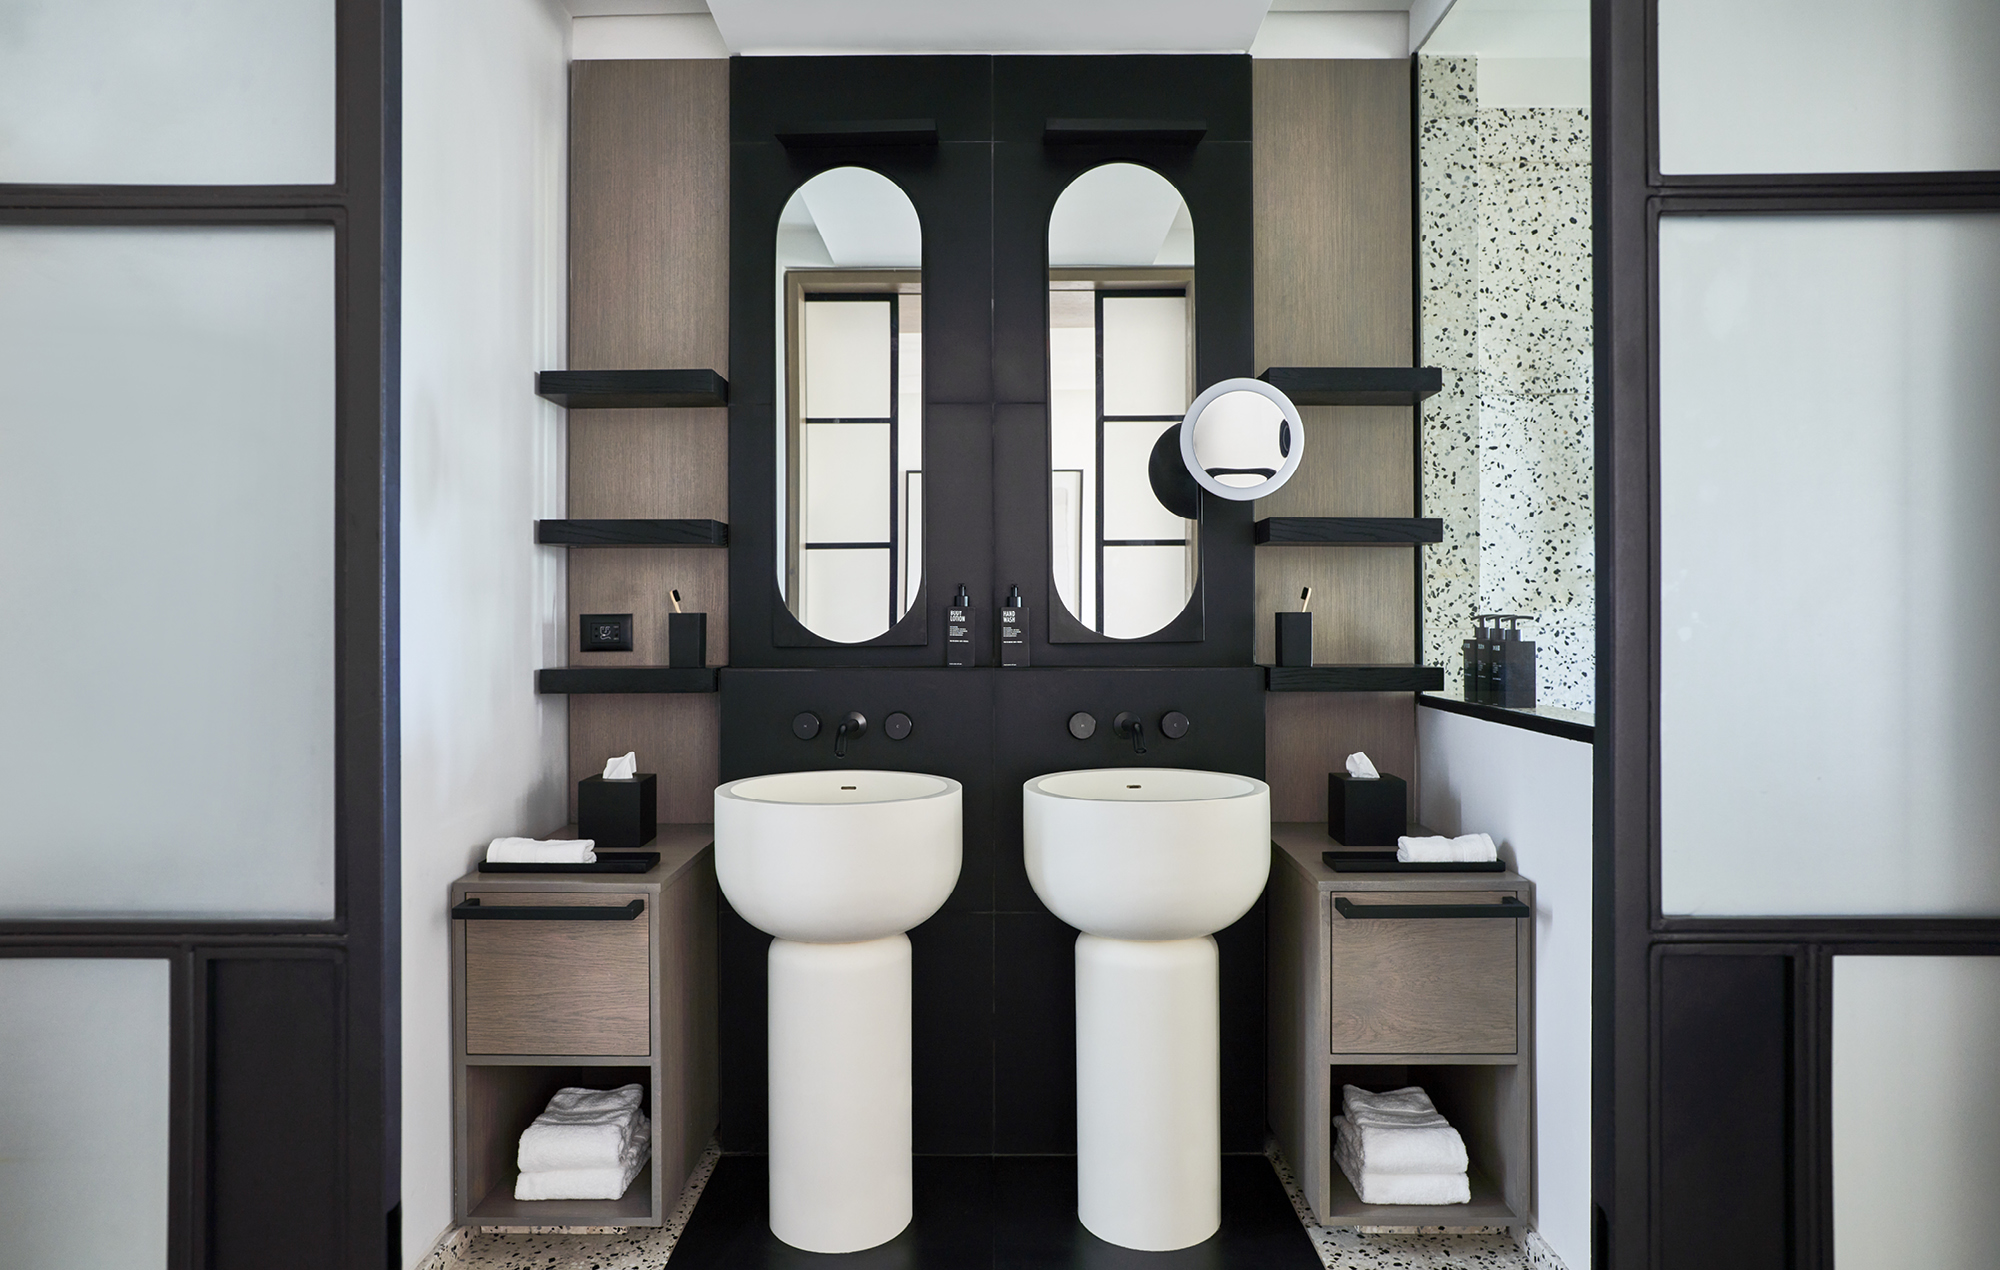 A bathroom at LUX* Grand Baie shows the striking design-led aesthetic of the resort